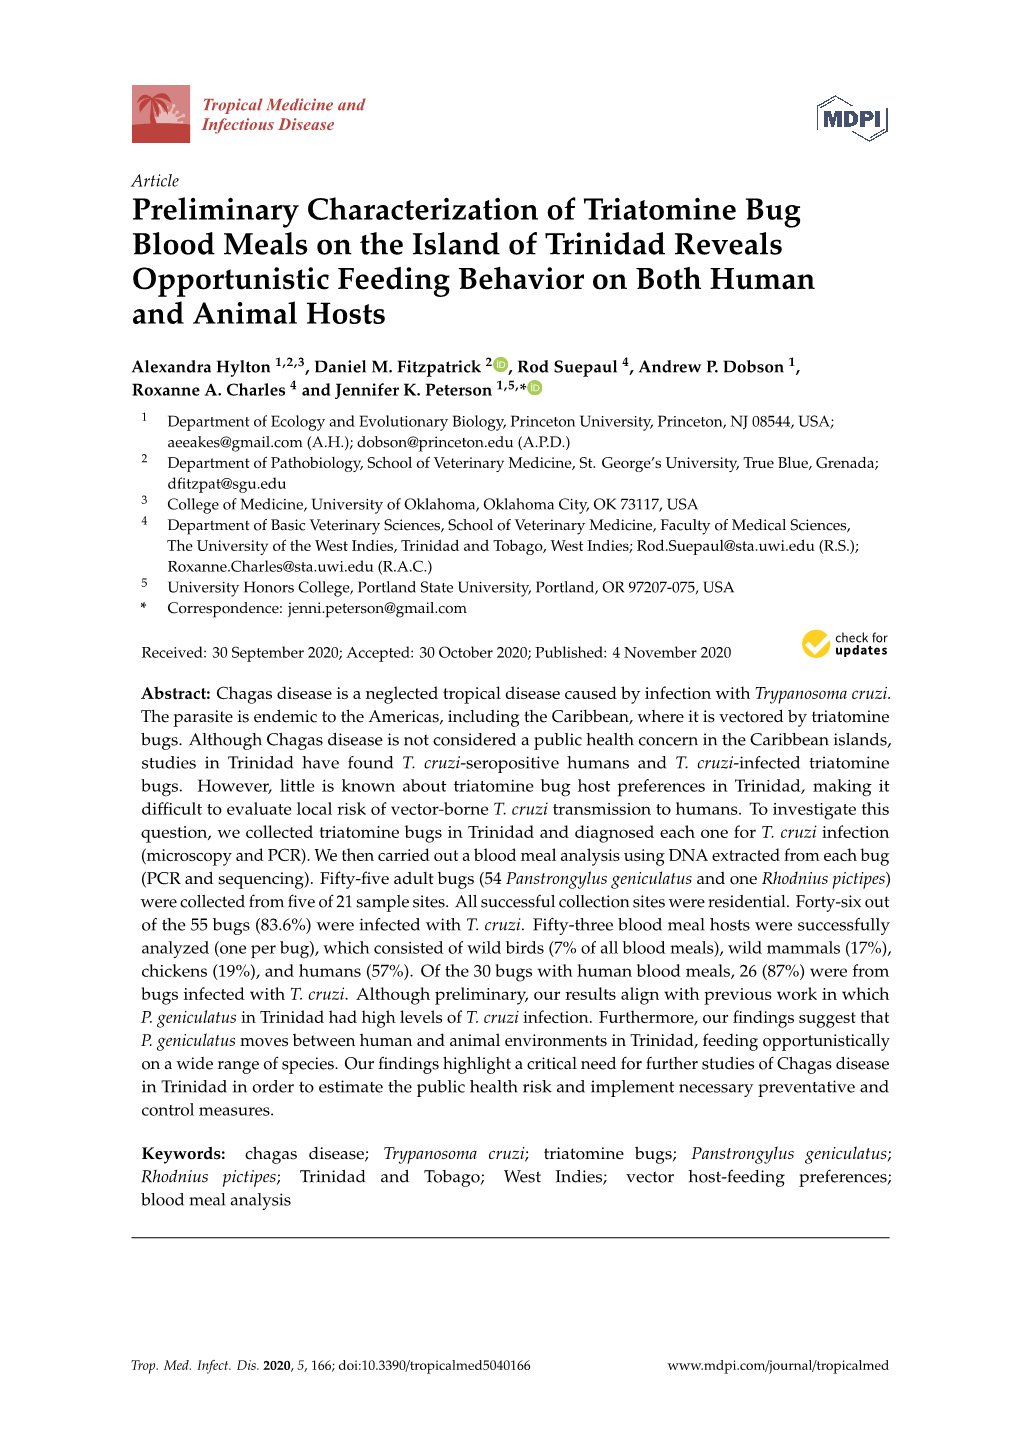 Preliminary Characterization of Triatomine Bug Blood Meals on the Island of Trinidad Reveals Opportunistic Feeding Behavior on Both Human and Animal Hosts